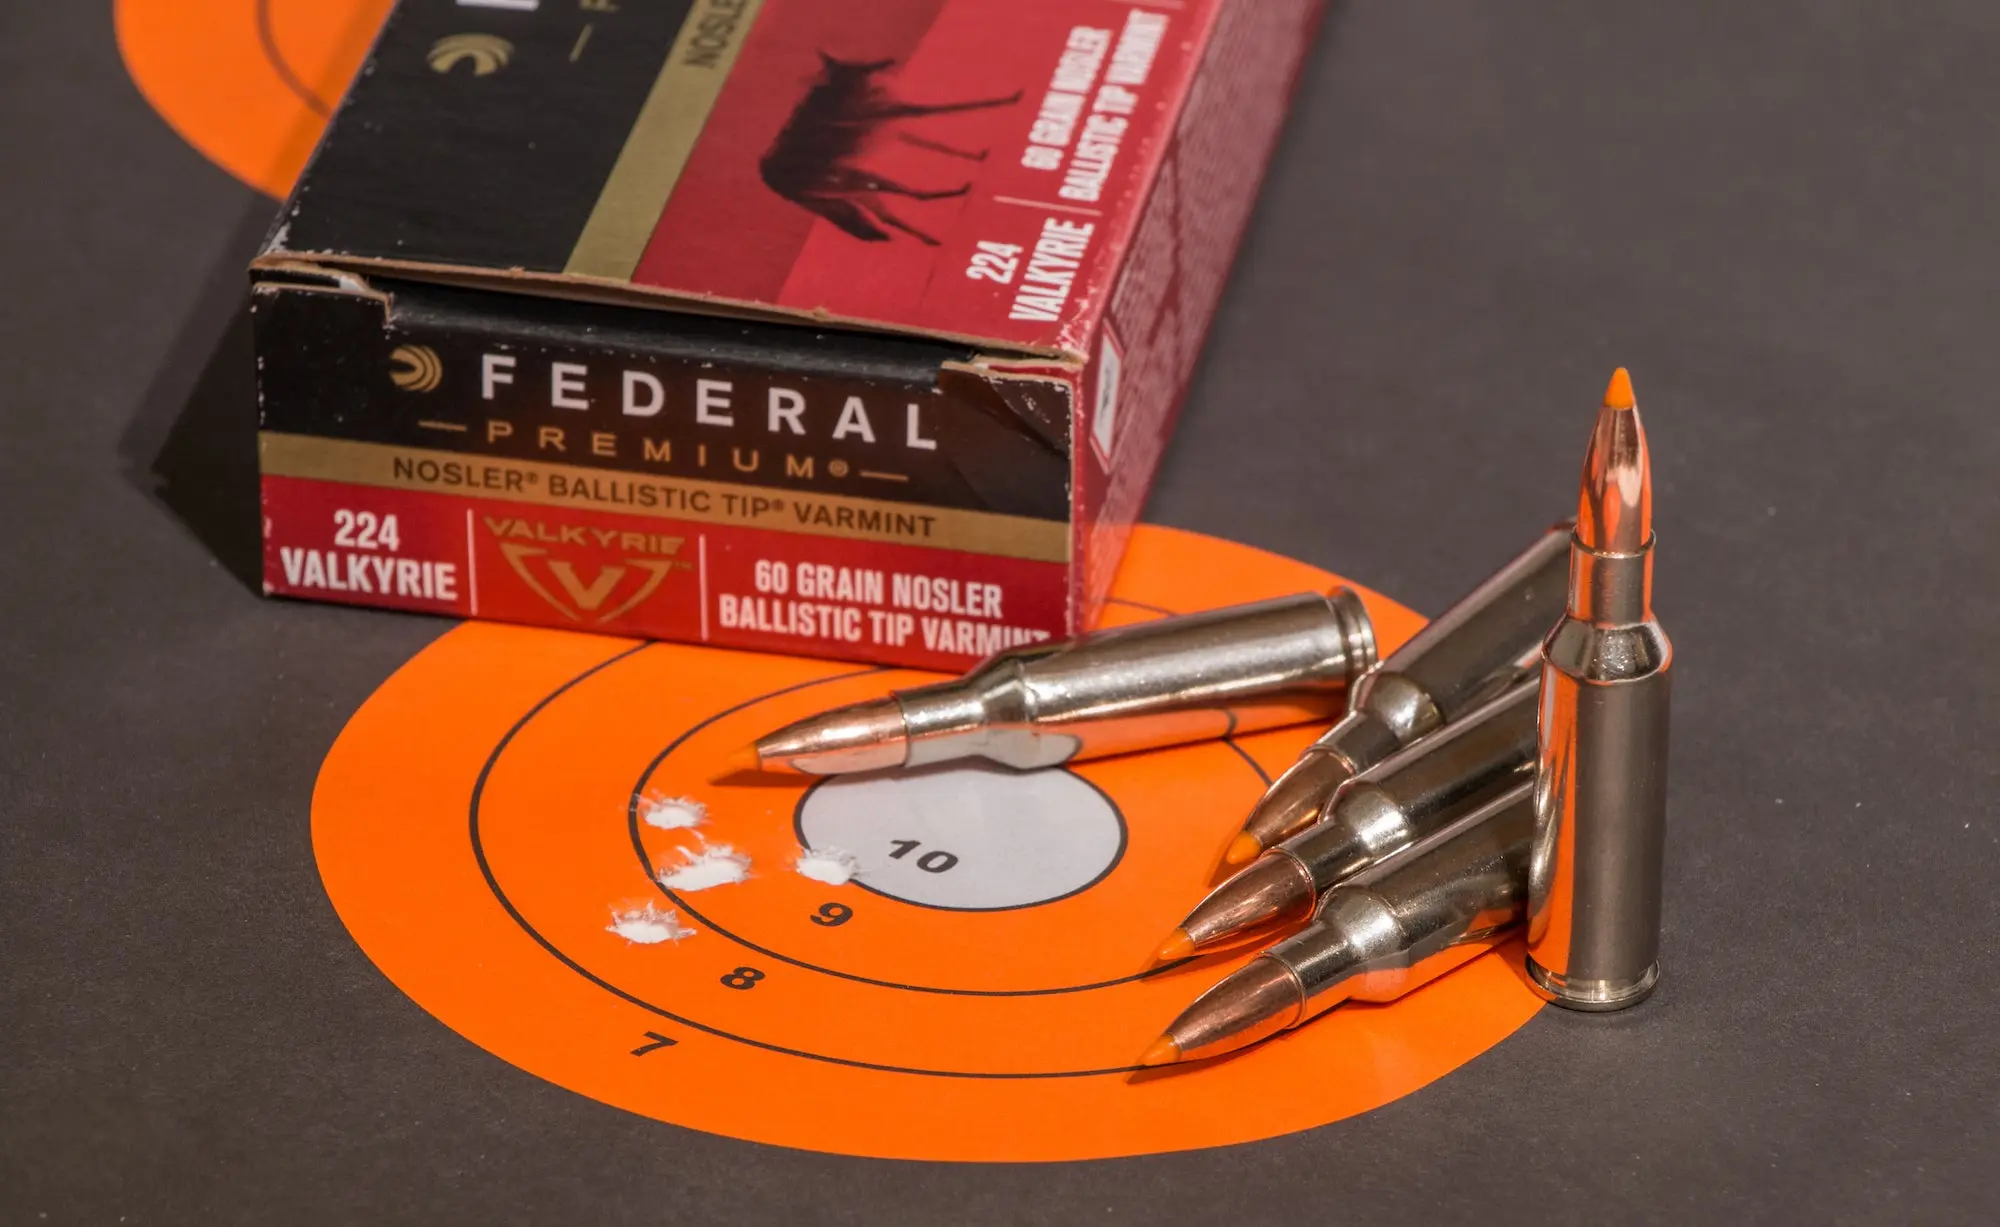 224 Valkyrie vs 223: Target with bullet holes and box of ammunition.